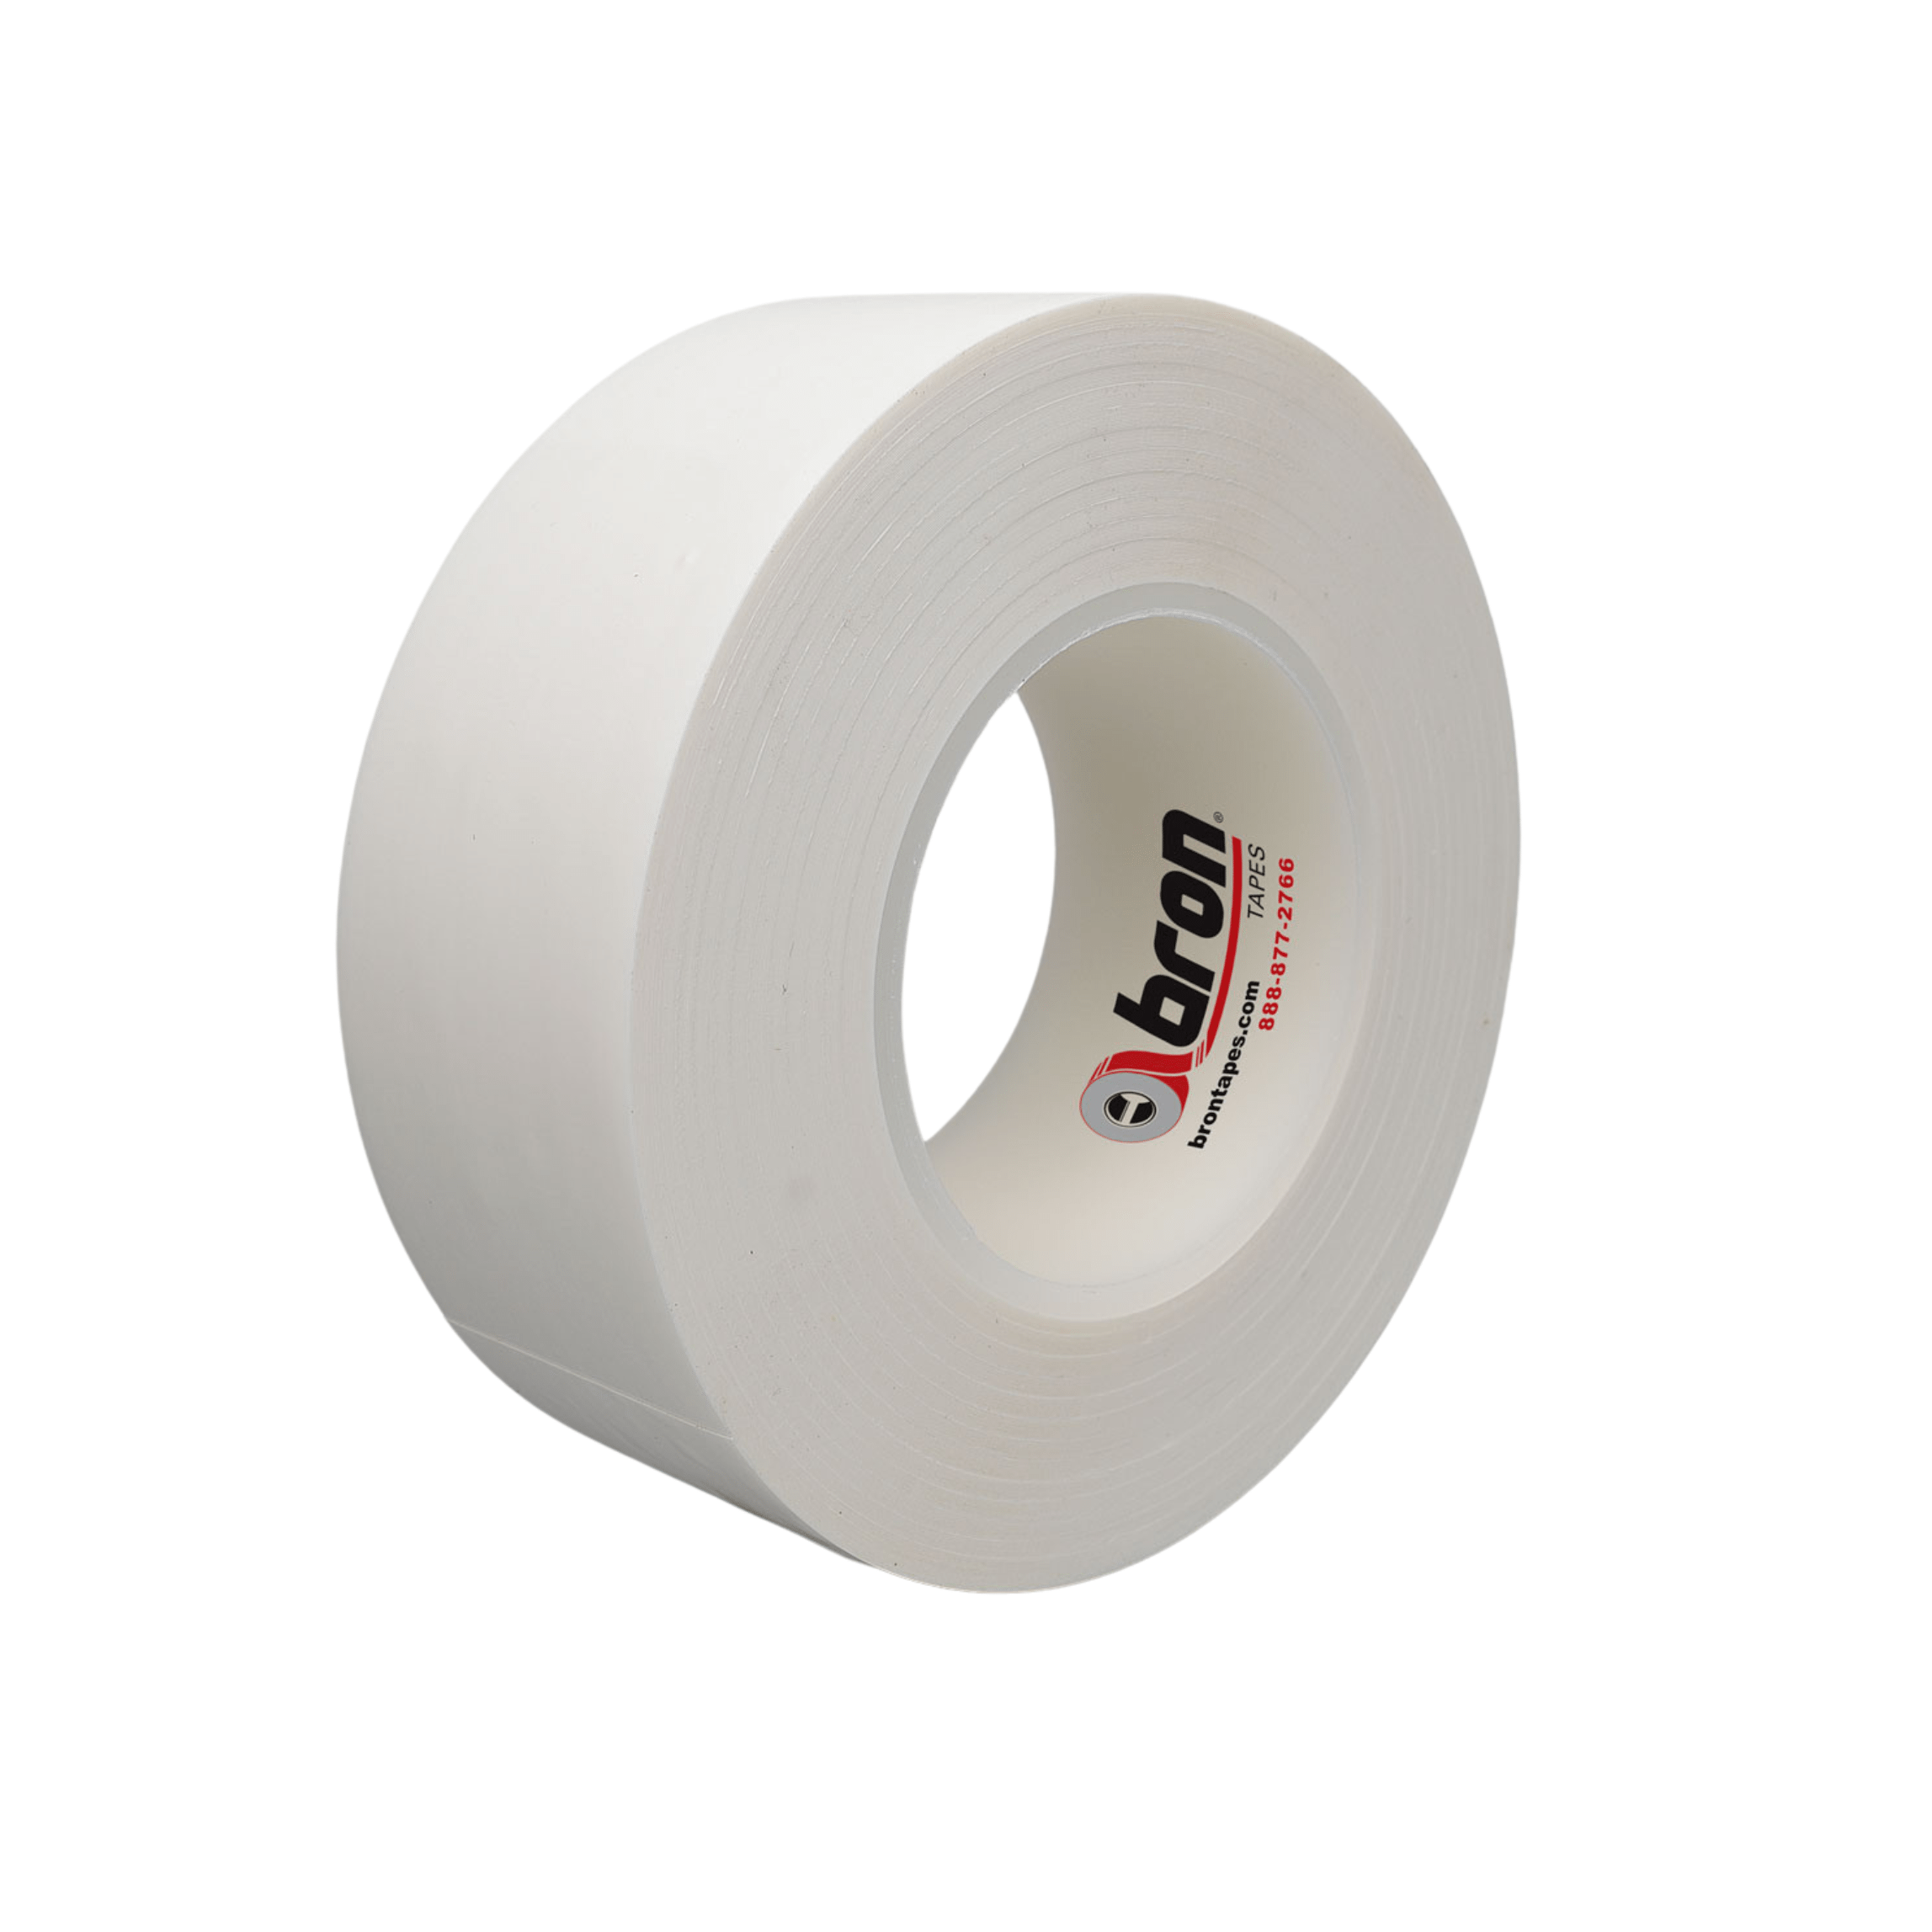 Zip-Up Double Sided Poly Sheeting Containment Tape 2” x 60' Roll